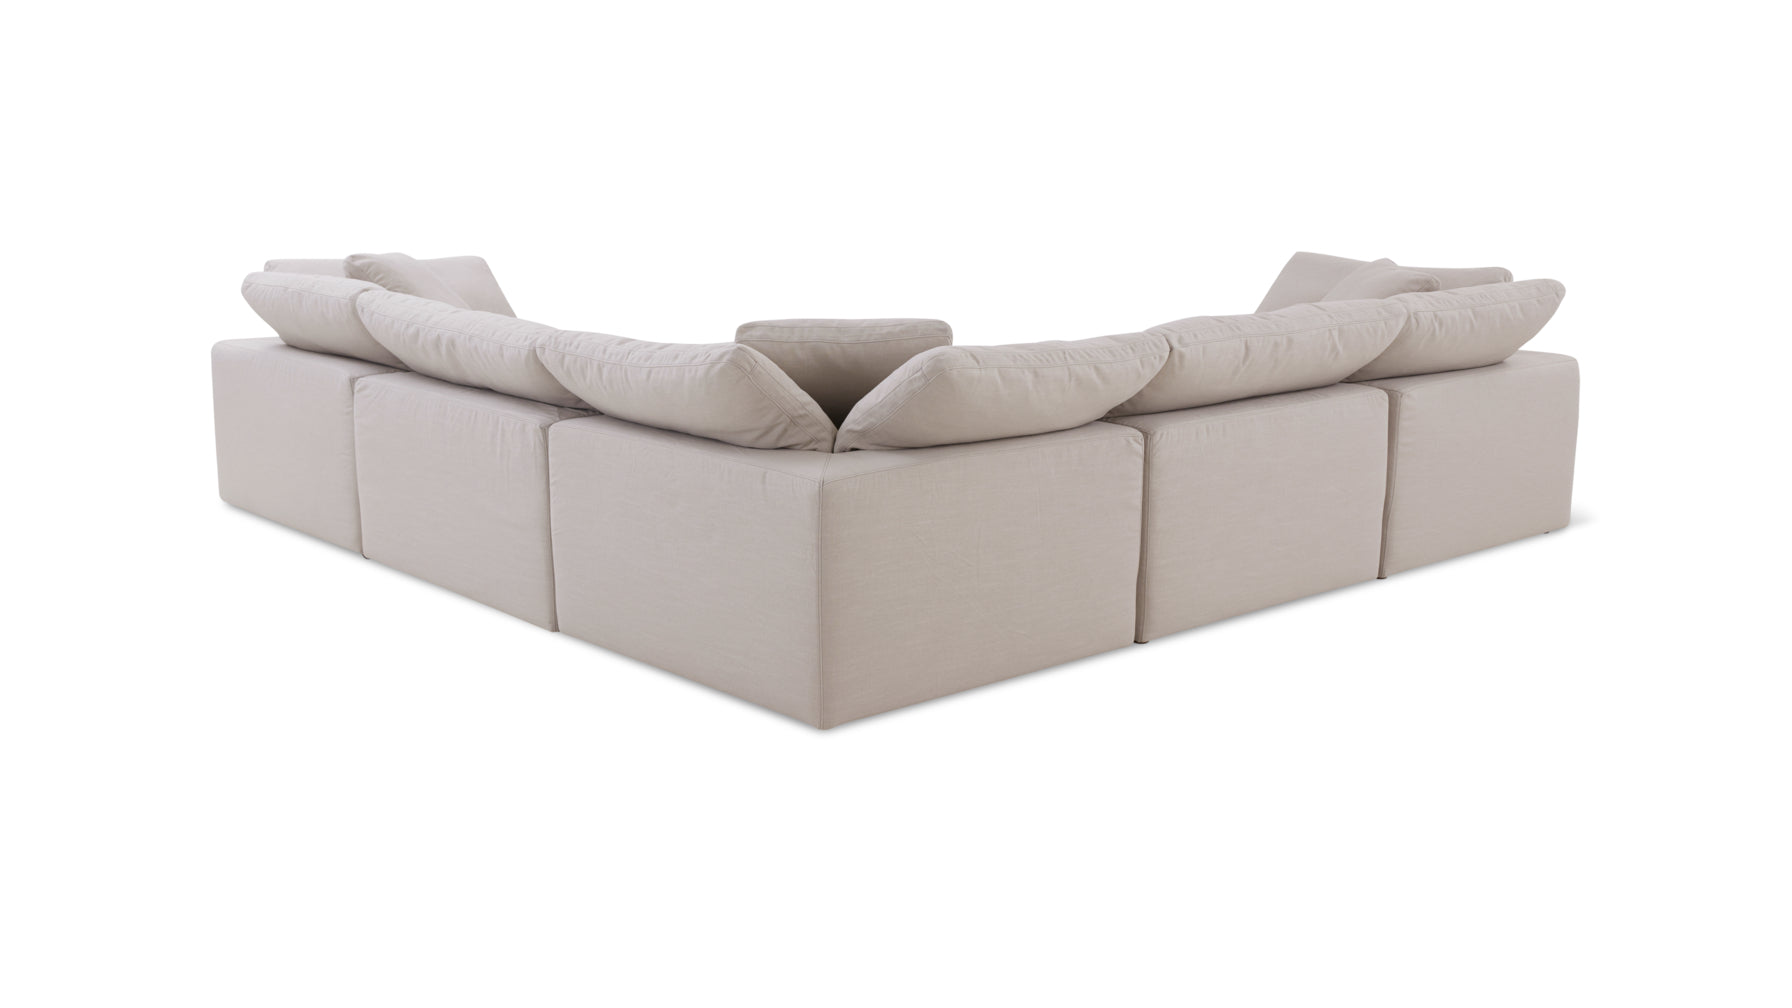 Movie Night™ 5-Piece Modular Sectional Closed, Large, Clay - Image 9